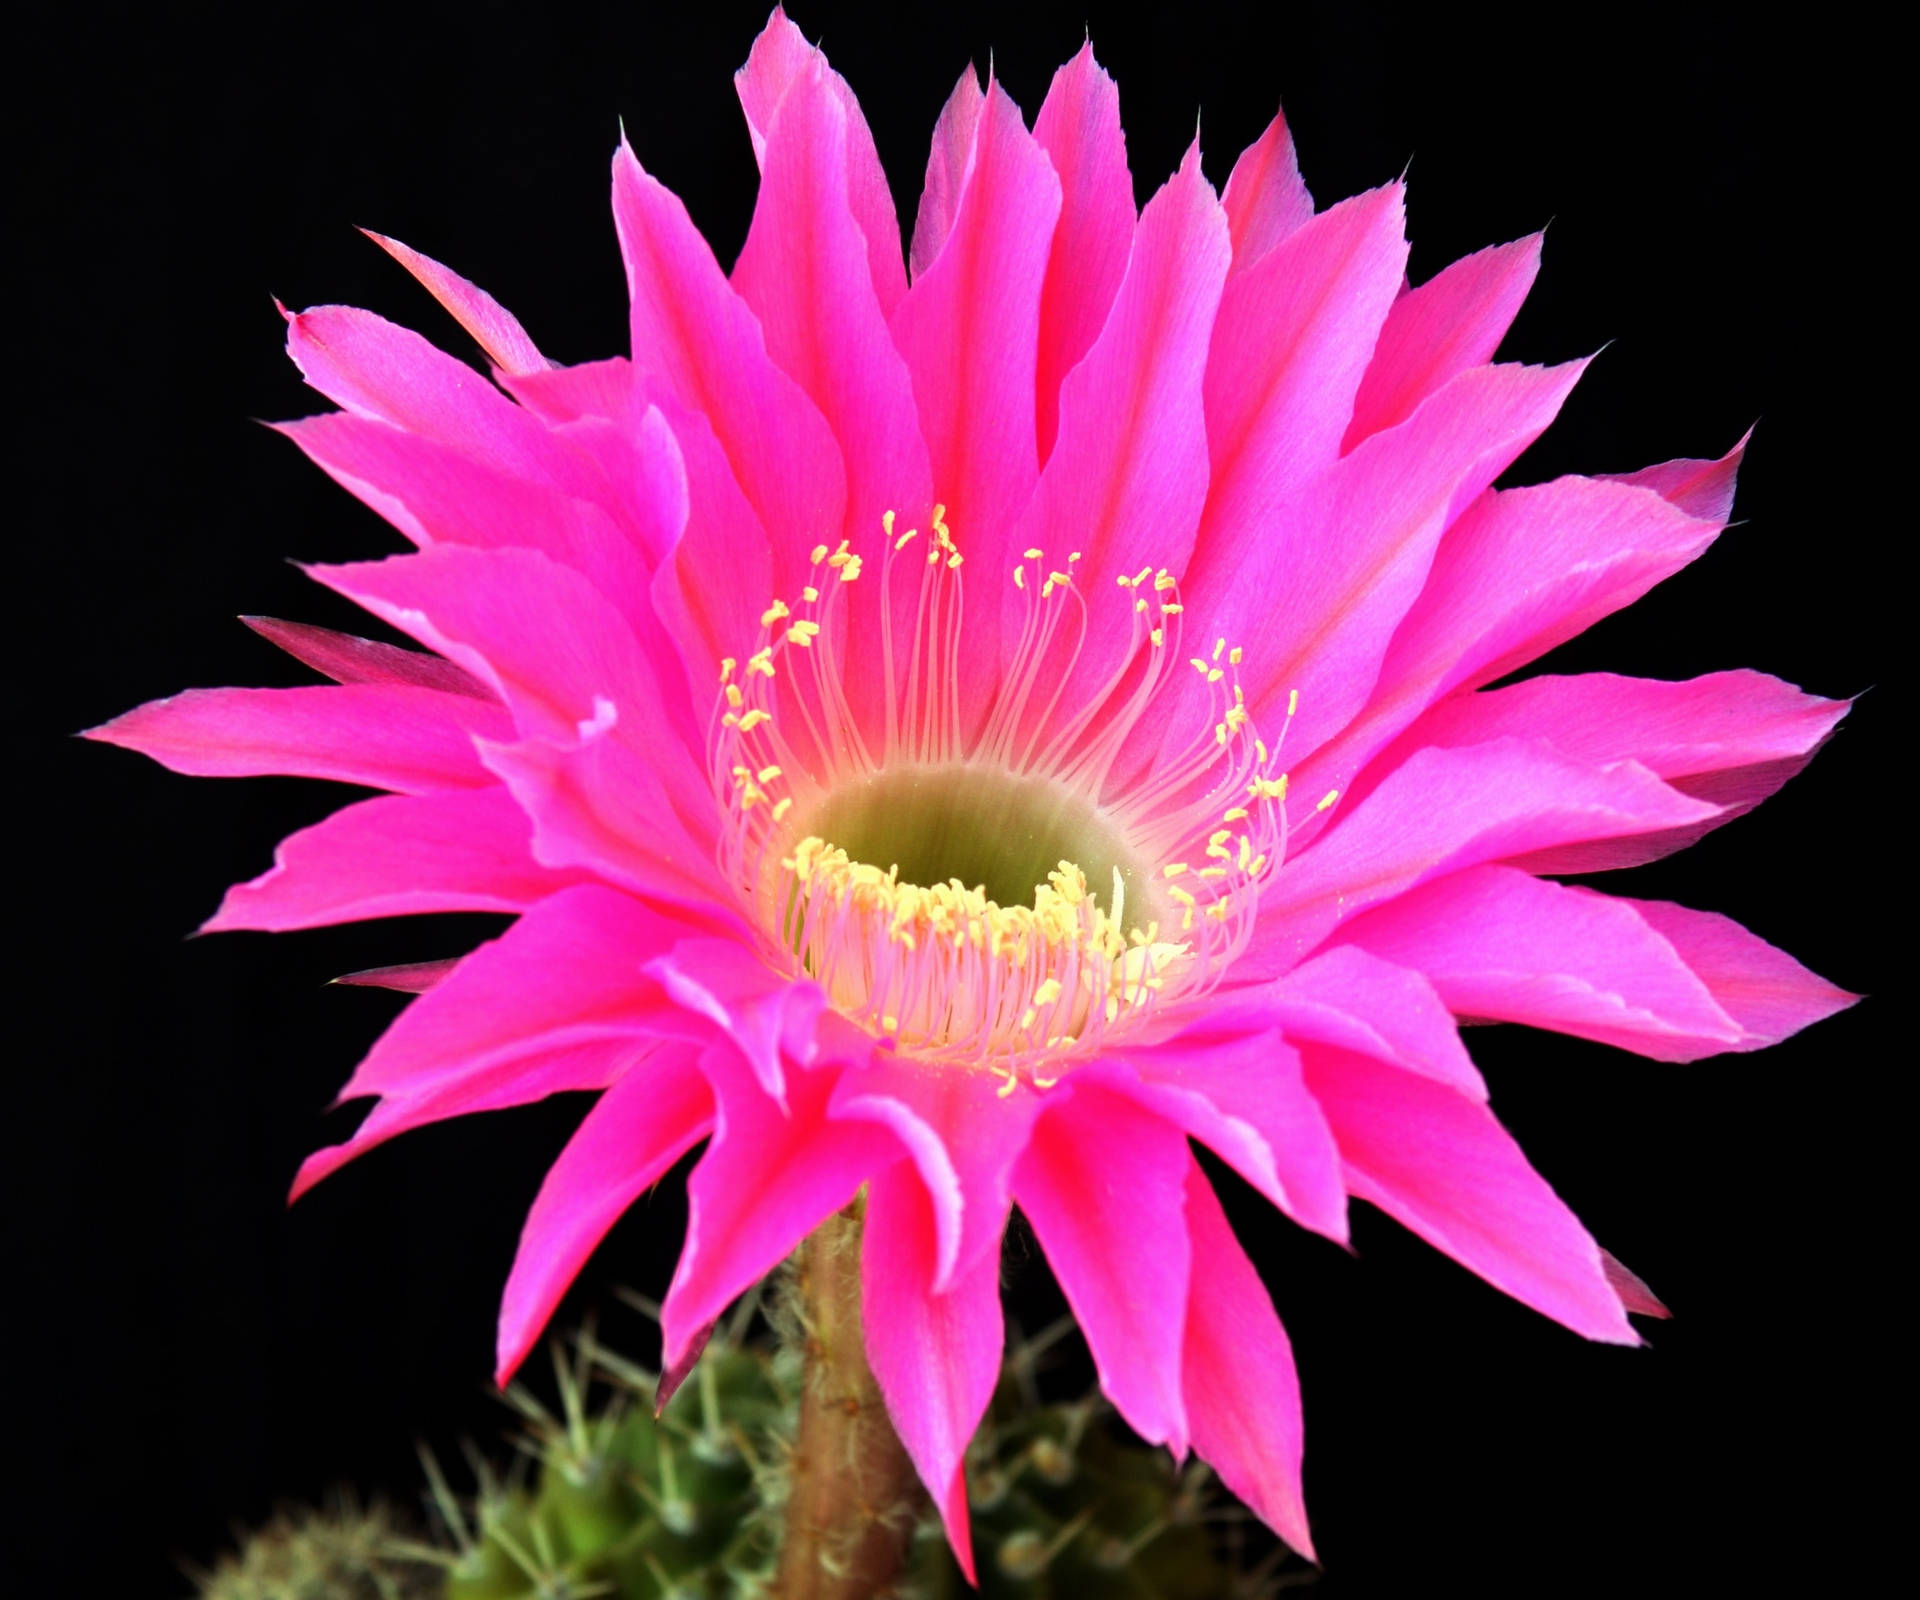 Pink Blossomed Cactus Flower